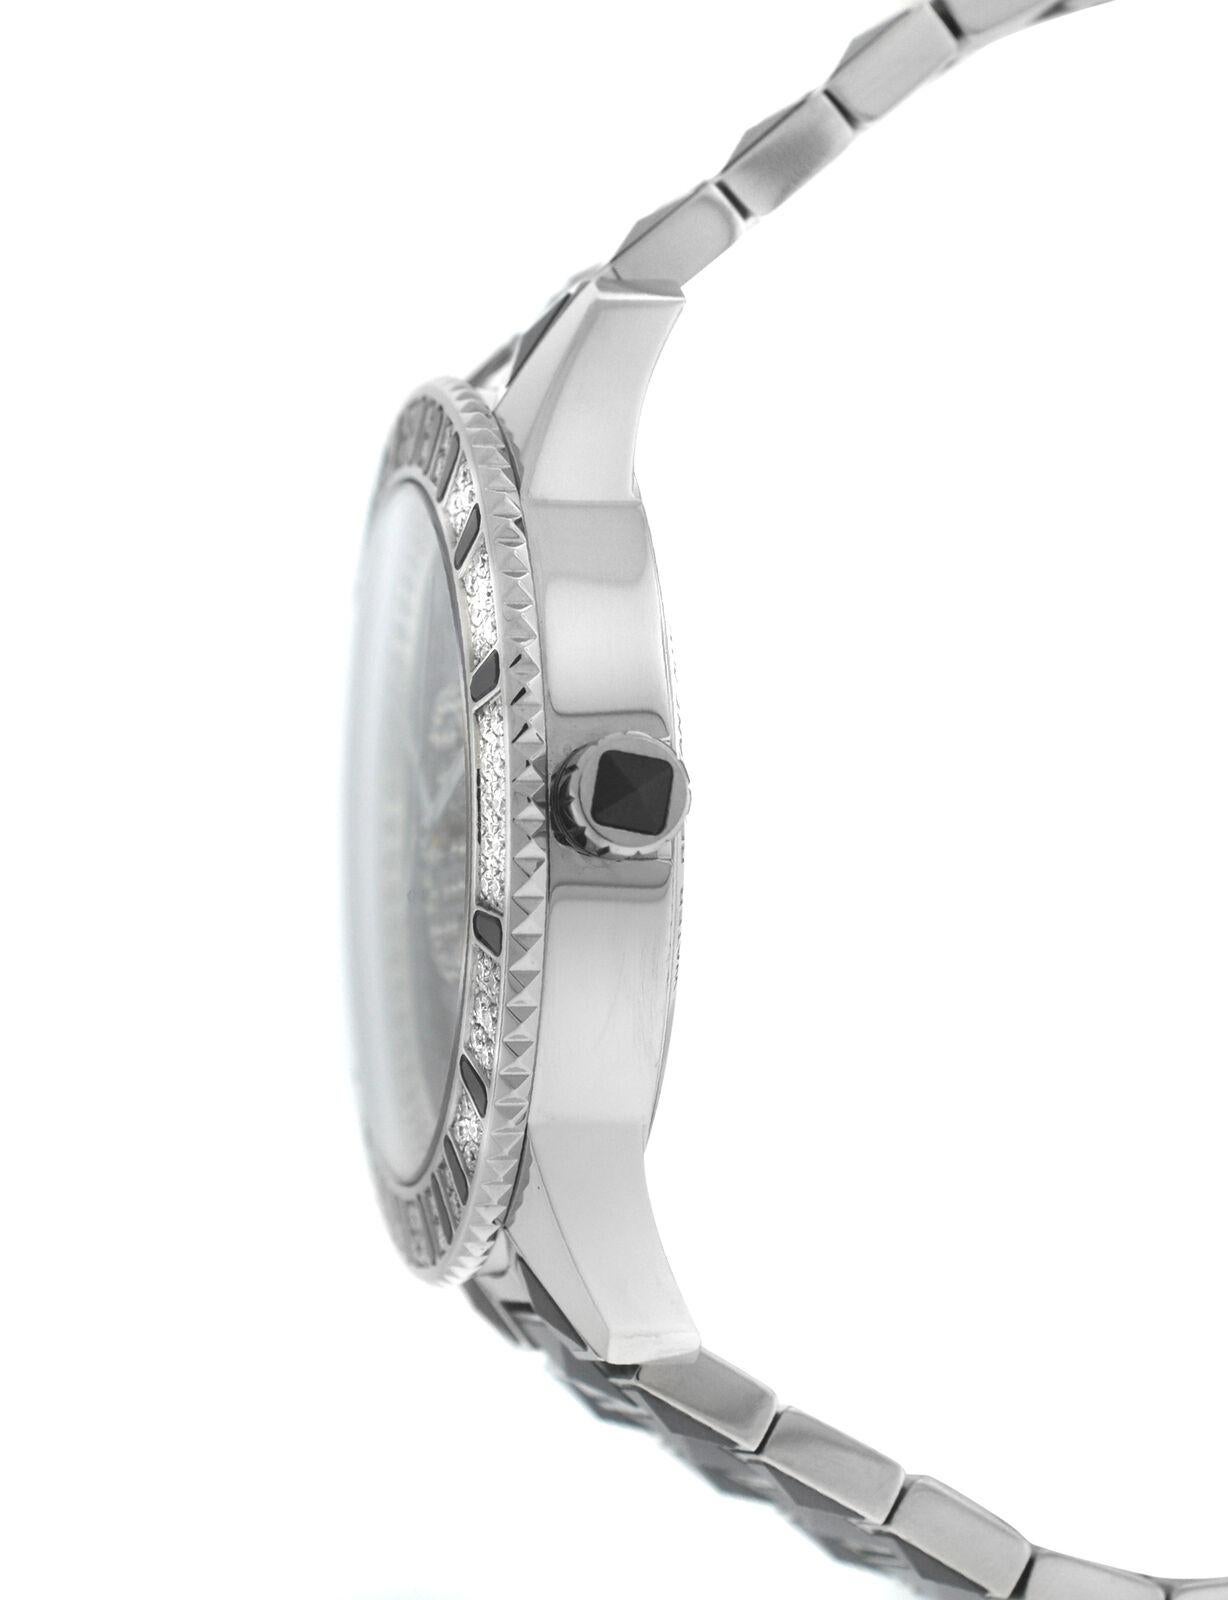 Brand	Christian Dior
Model	Christal CD115511M001
Gender	Unisex 
Movement	Swiss Automatic
Case Material	Ceramic
Bracelet / Strap Material	
Ceramic

Clasp / Buckle Material	
Stainless Steel 	
Clasp Type	Butterfly deployment
Bracelet / Strap width	20